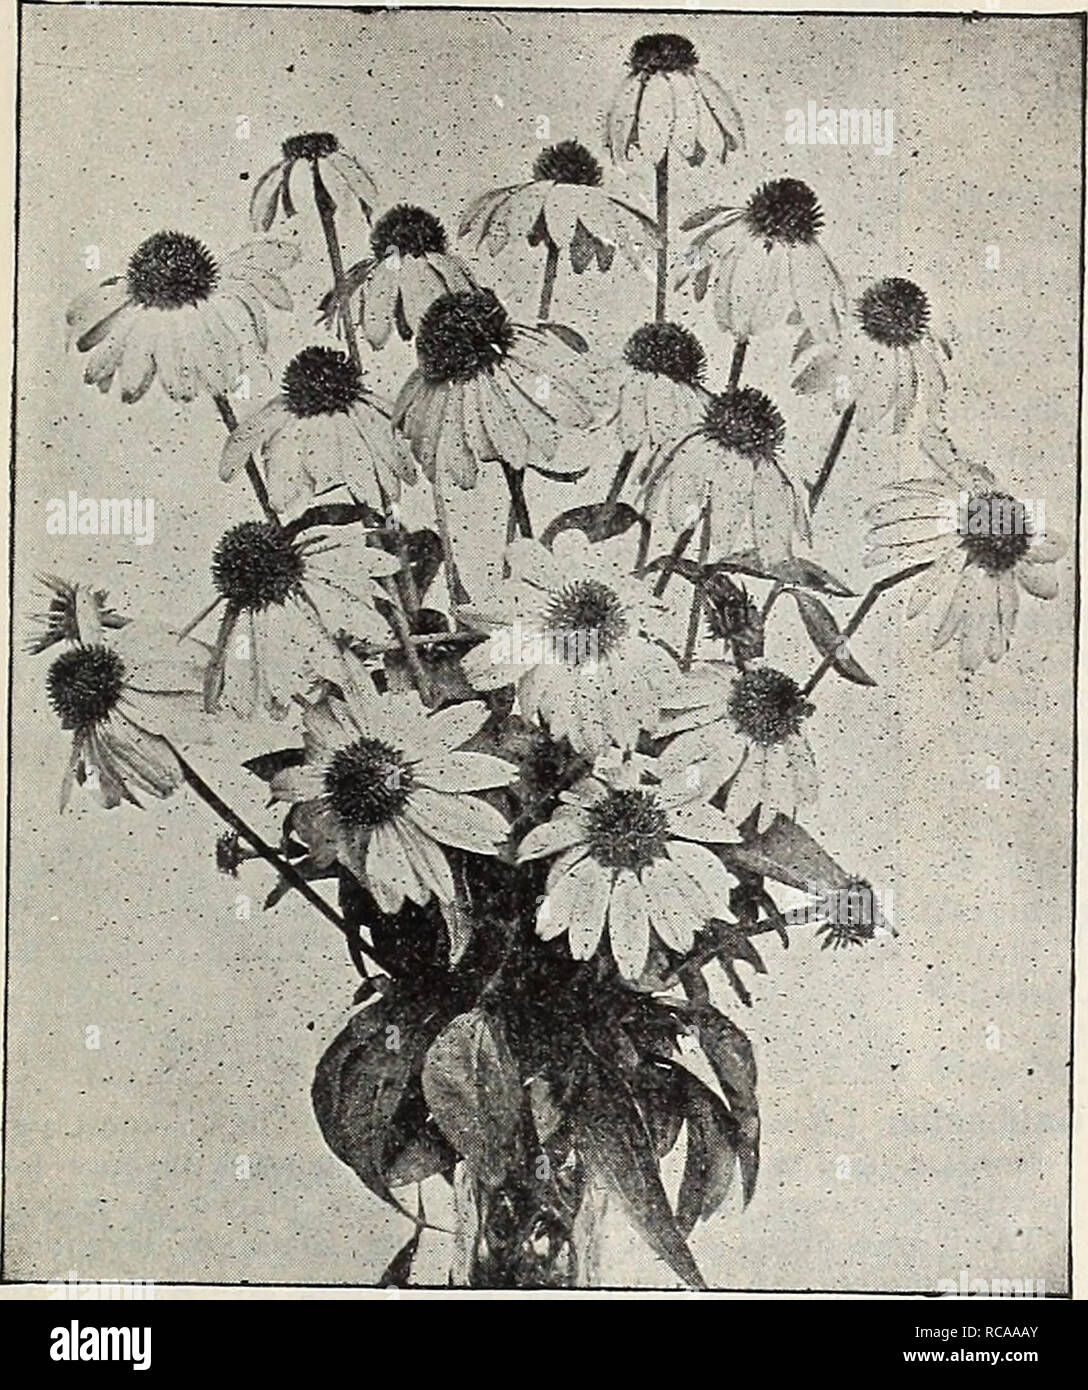 . Dreer's 1907 garden book. Seeds Catalogs; Nursery stock Catalogs; Gardening Equipment and supplies Catalogs; Flowers Seeds Catalogs; Vegetables Seeds Catalogs; Fruit Seeds Catalogs. W HARDY PERENNIAL PIsANTJ 183. Rudbeckia Purpurea. RVDBECKI4 (Cone-flower). Fulgida. Brilliant orange-yellow flowers ; produced in masses on much-branched plants, 2 feet high, from July to September. Golden Glow. We question if any one hardy perennial plant has ever met with greater popularity than this. It is a strong, robust grower, attaining a height of 5 to 6 feet, and produces masses of double golden-yellow  Stock Photo